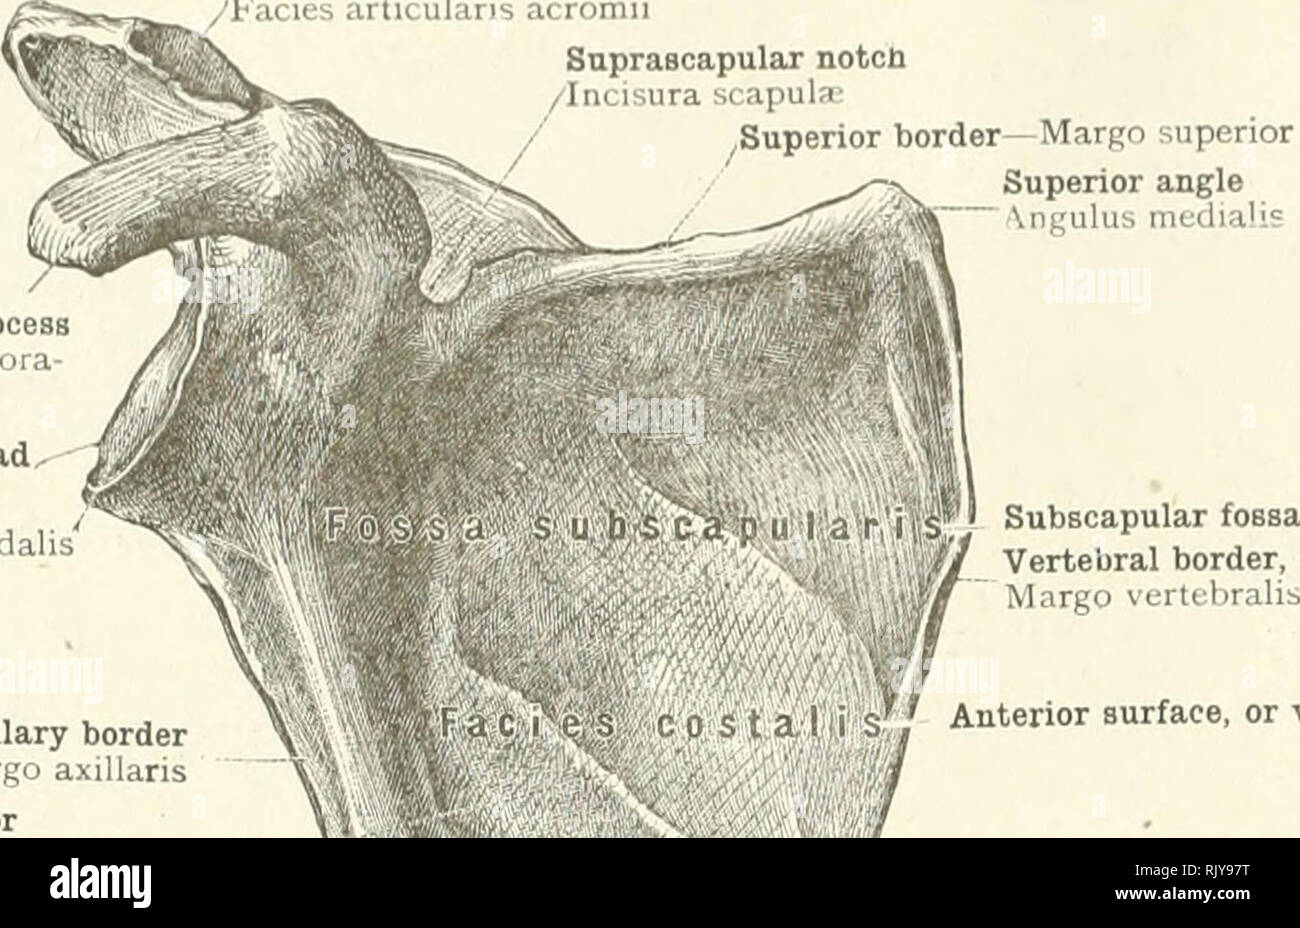 . An atlas of human anatomy for students and physicians. Anatomy. 110 THE SKELETON OF Till: UPPER EXTREMITY Clavicular facet /Facies articularis acromii Suprascapular notch lira scapula' ,Superior borderâMargo superior Superior angle &quot; Angulus medialis Coracoid process Processus cora- coideus Glenoid fossa Cavitas glenoidalis 'Oblique lines for the attachment of the tendinous intersections of the sub3capularis muscle â¢Lineae musculares. Subscapular fossa II Vertebral border, or base Axillary border Margo axillaris 0 S t a I i S Anterior surface, or venter / Acromion Acromion Superior ang Stock Photo